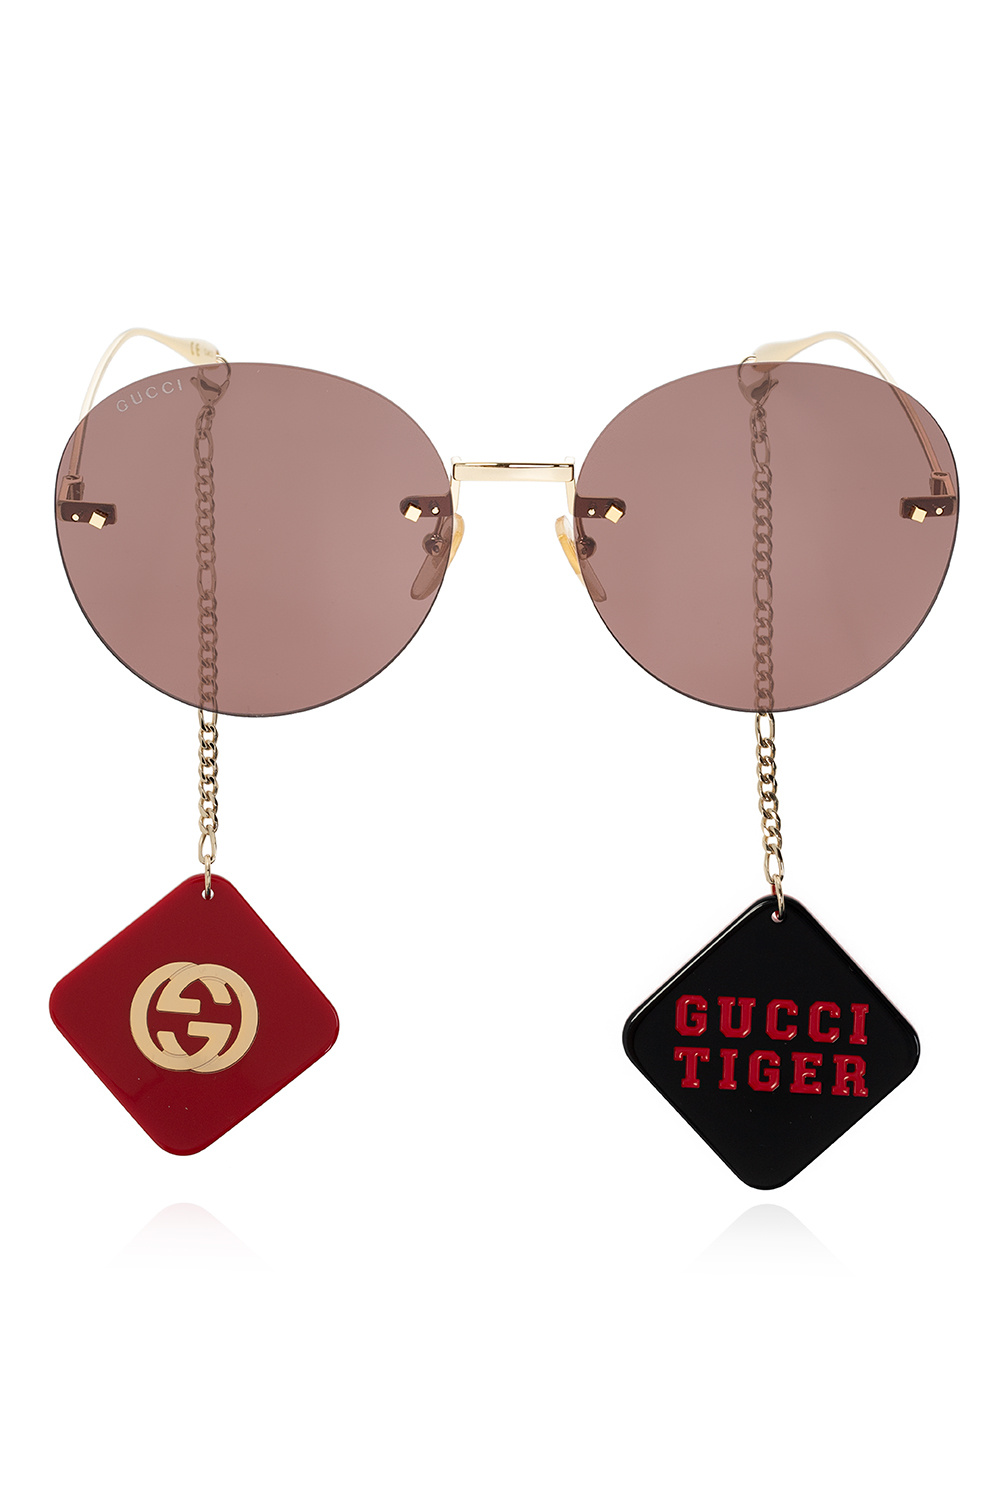 Gucci Sunglasses from the ‘Gucci Tiger’ collection